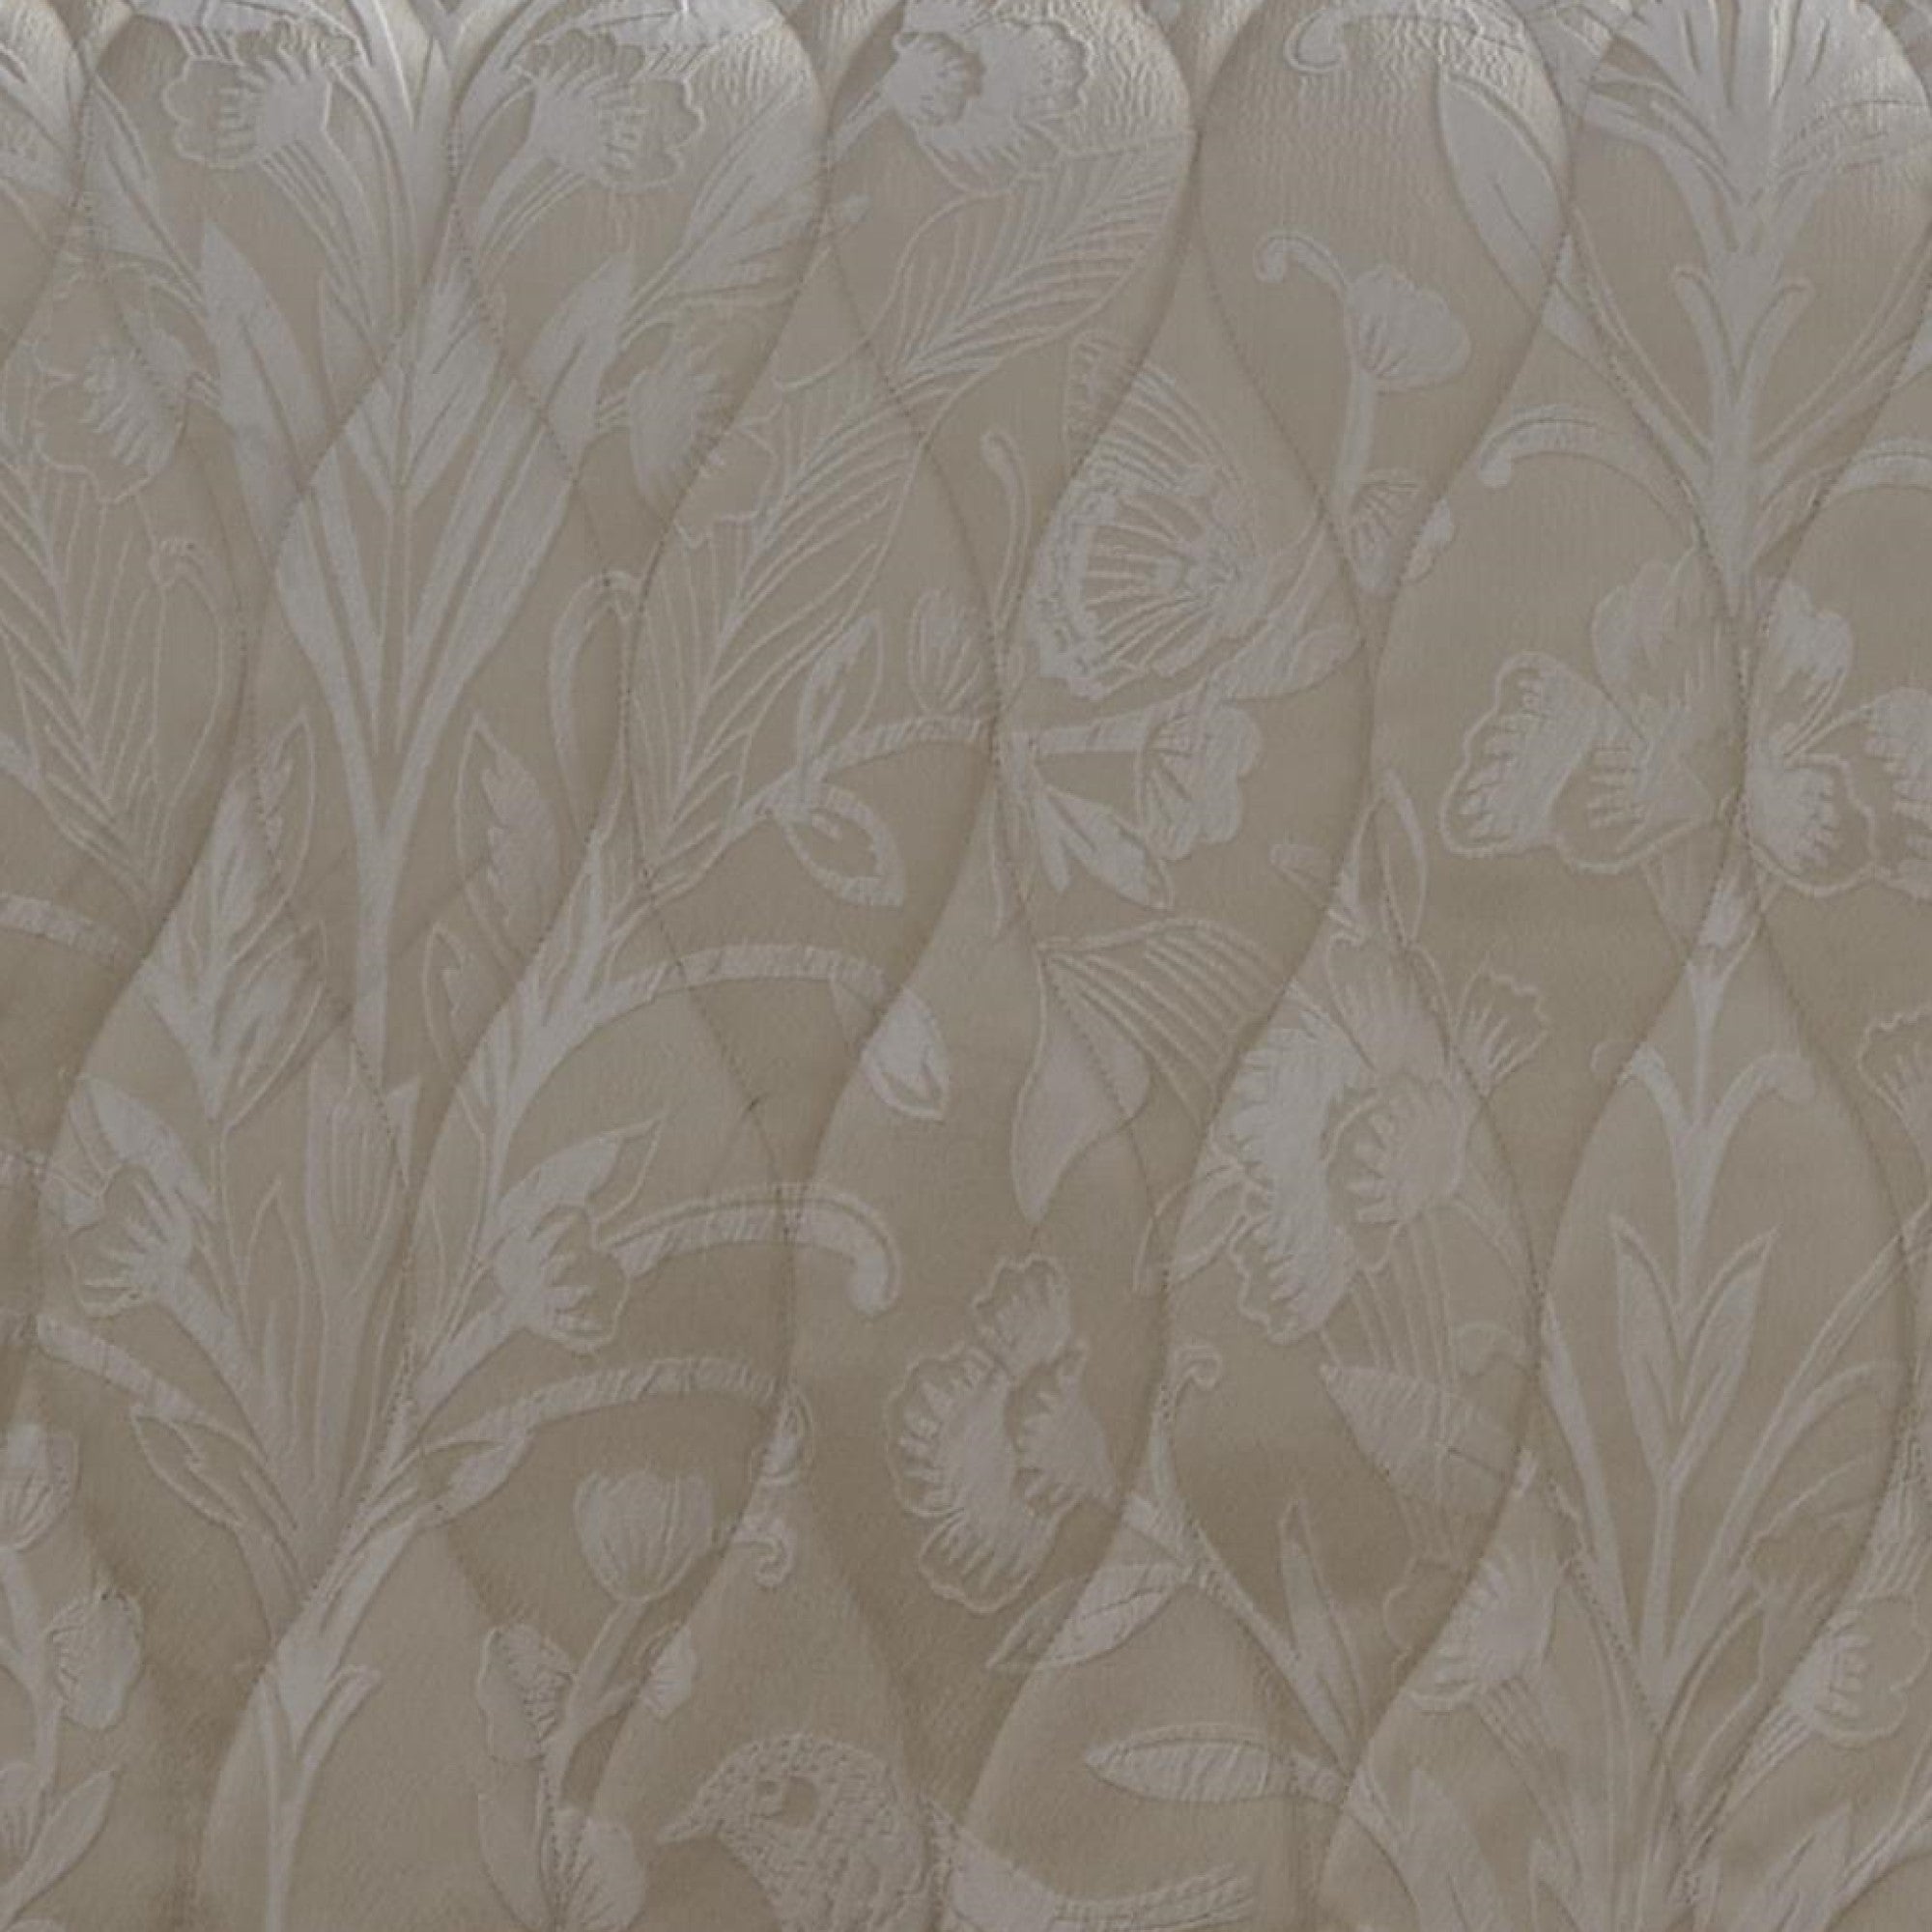 Bedspread Elysia by Appletree Heritage in Champagne